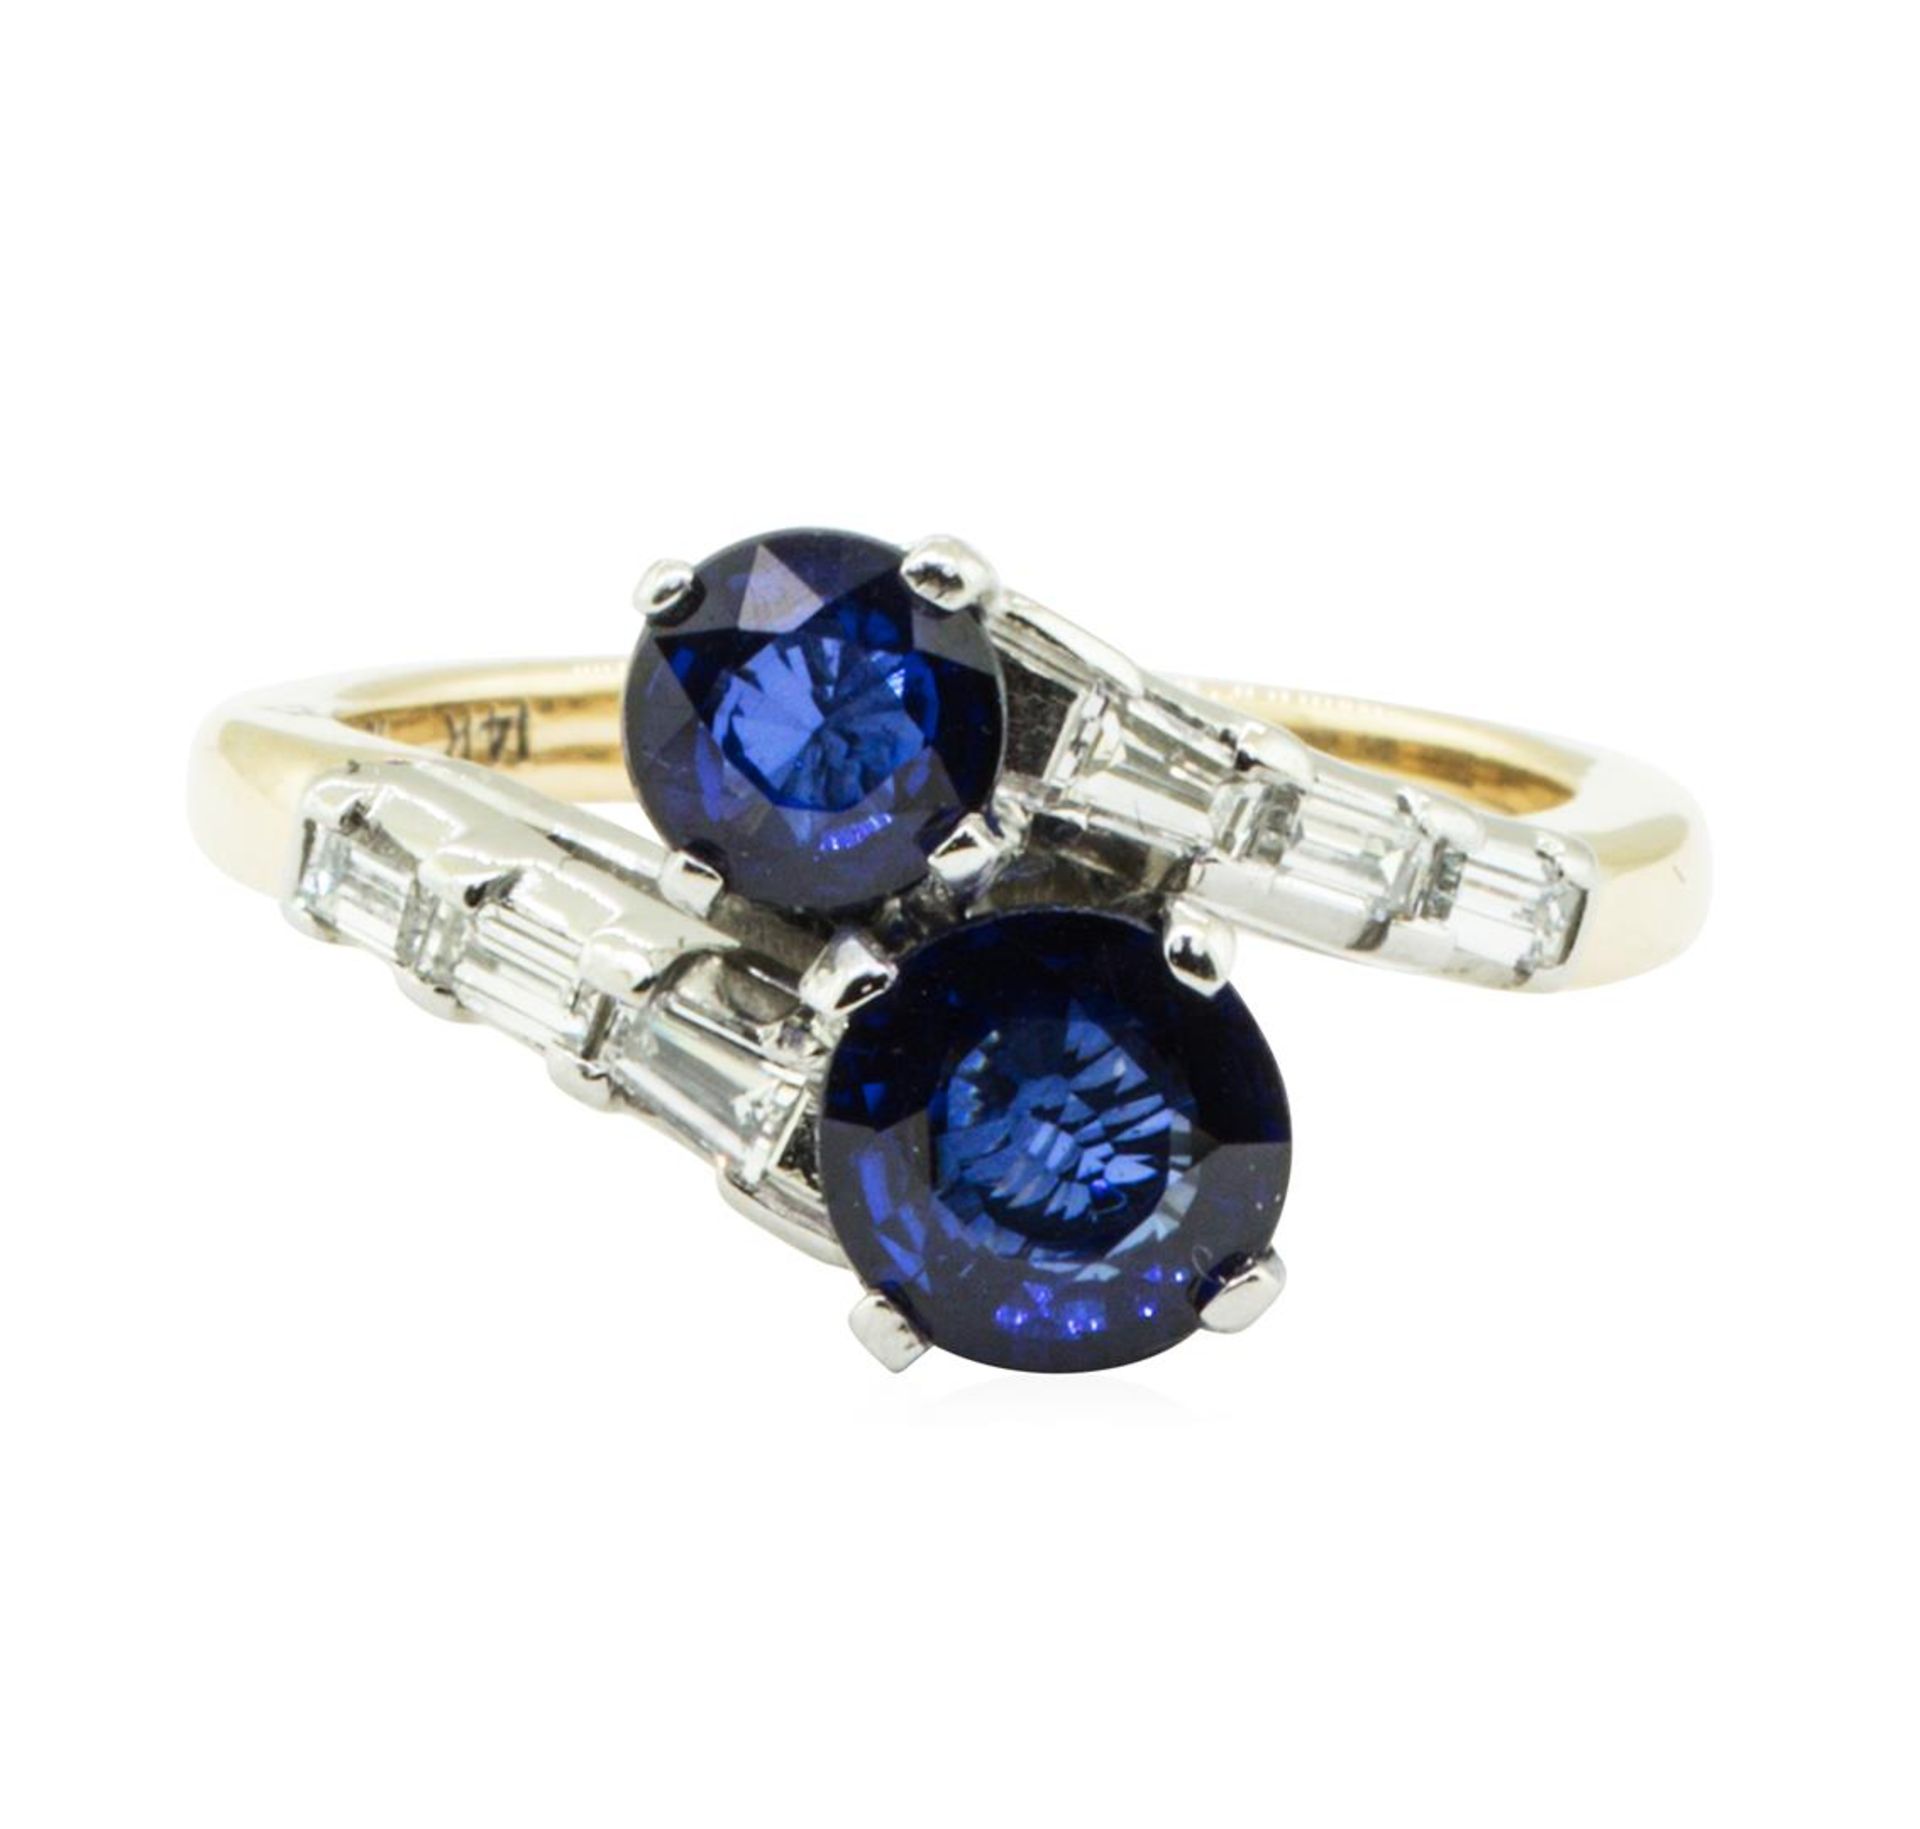 2.07 ctw Oval Brilliant Blue Sapphire Ring - 14KT Yellow Gold - Image 2 of 5